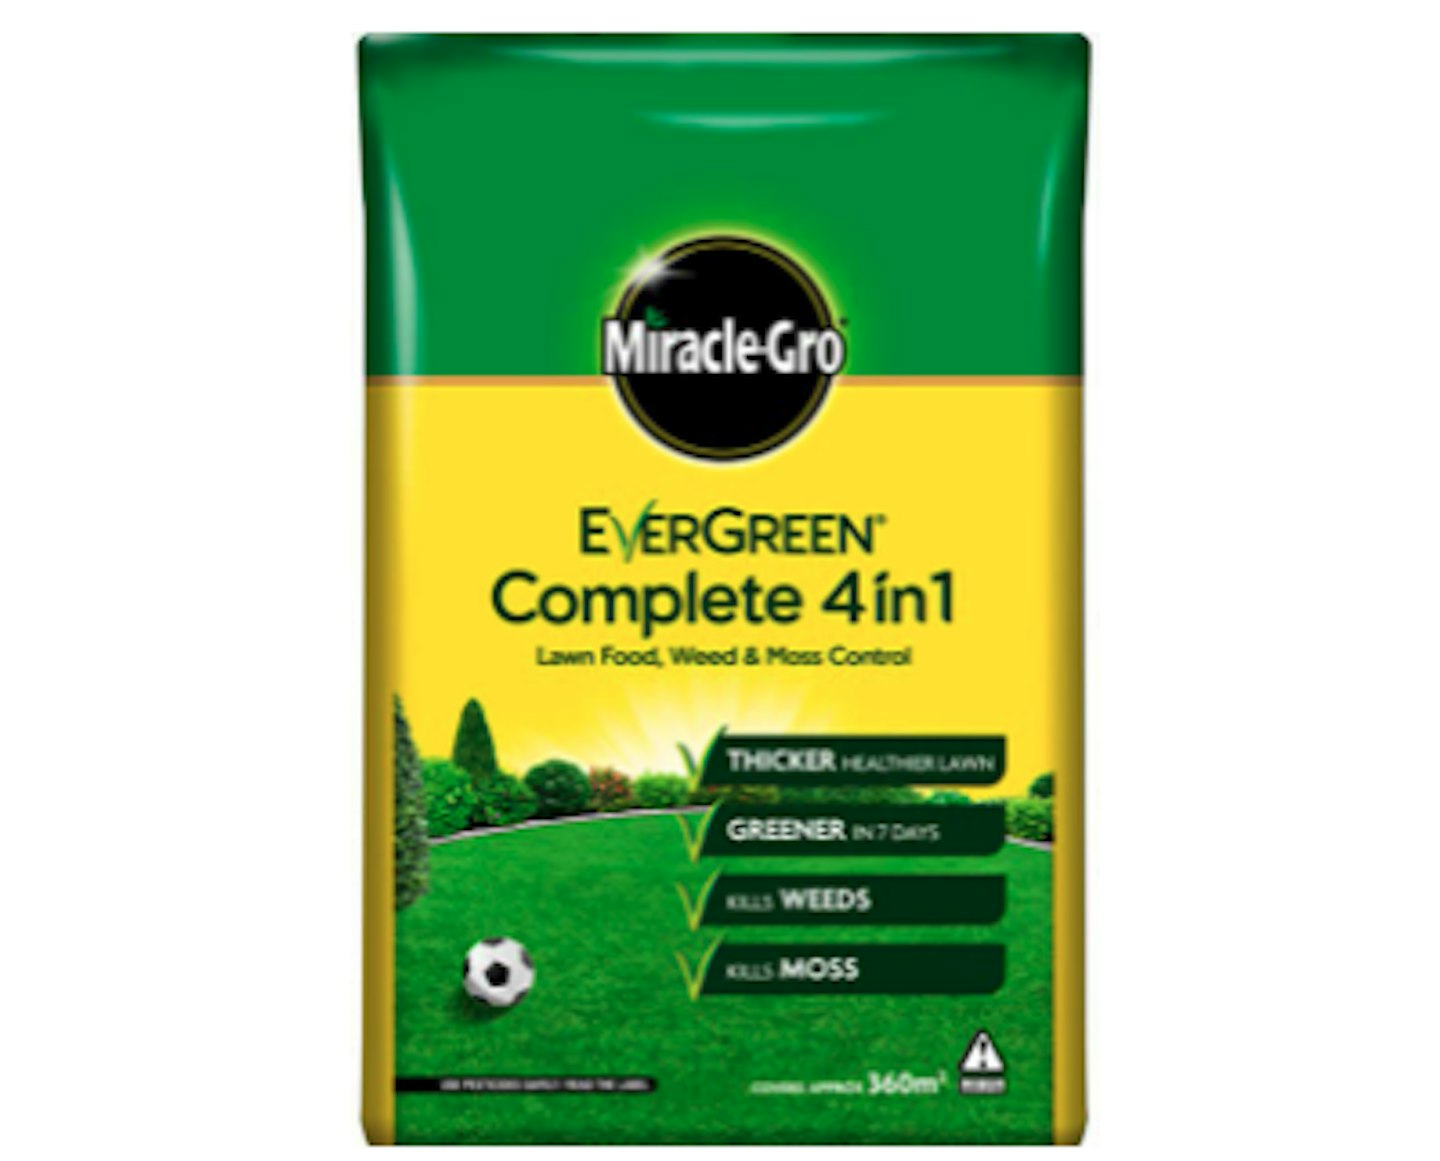 Miracle-Gro Evergreen Complete 4 in 1 Lawn Food